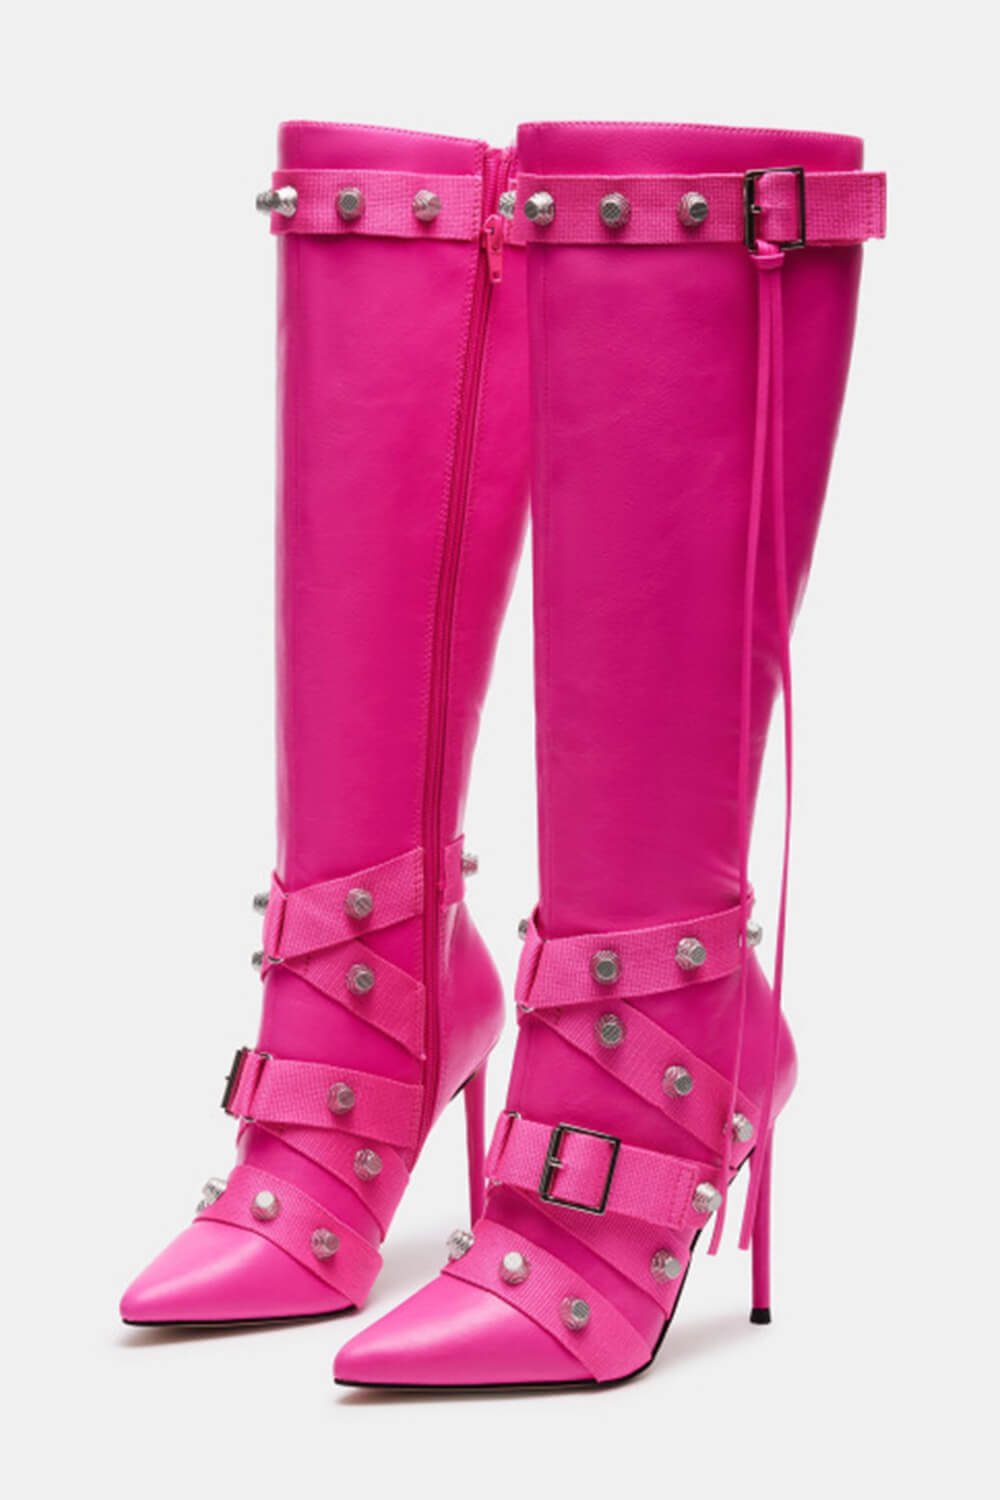 Pointed Toe Knee-High Stiletto Boots With Studs And Pin Buckle Strap Details - Hot Pink